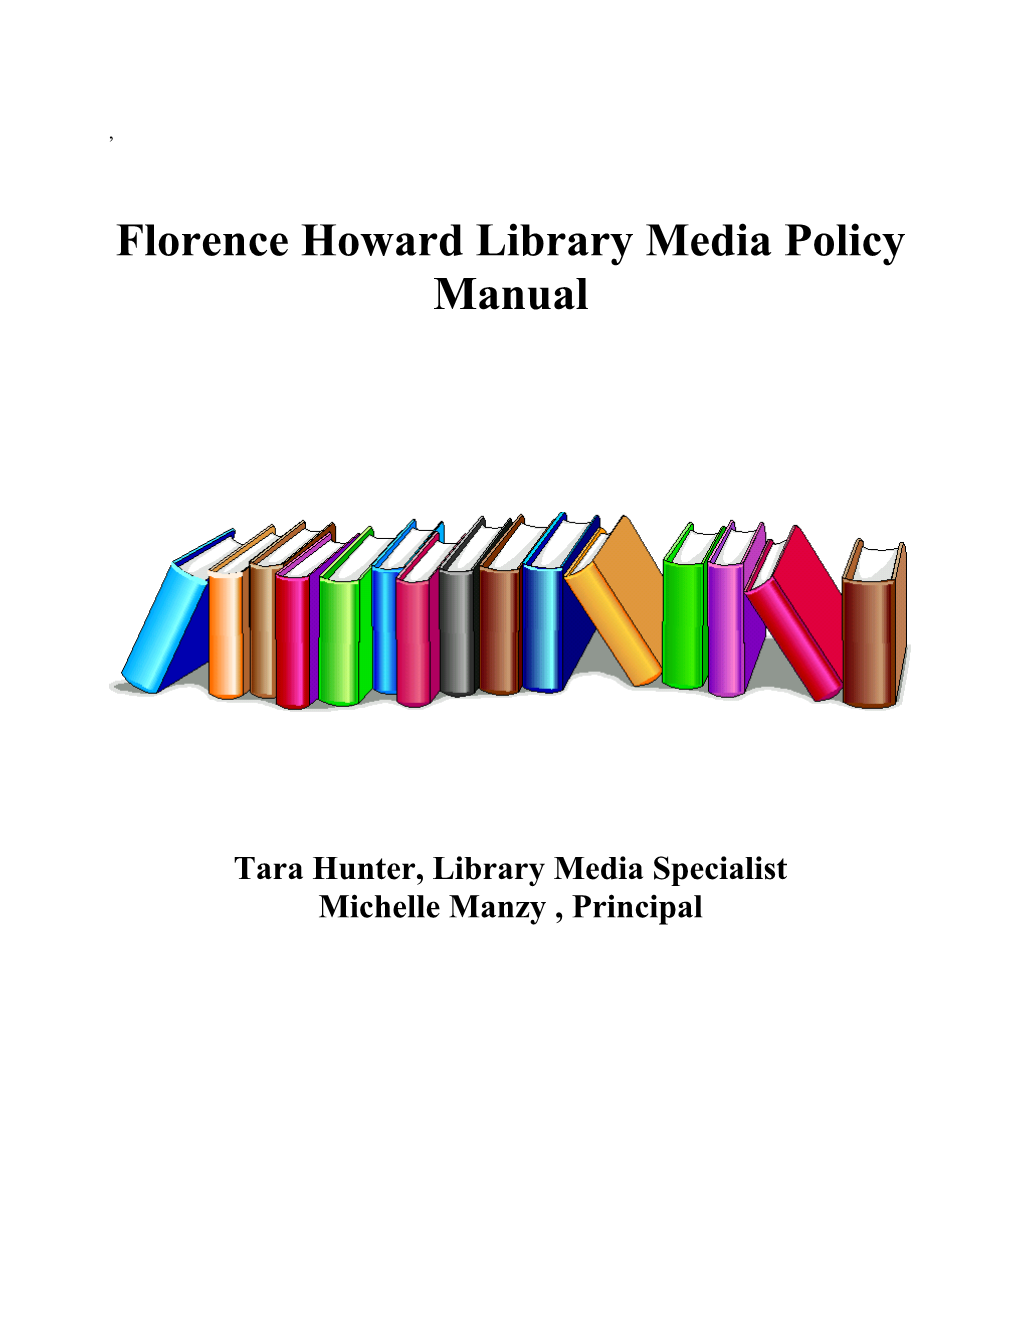 Indian Springs Library Media Policy Manual